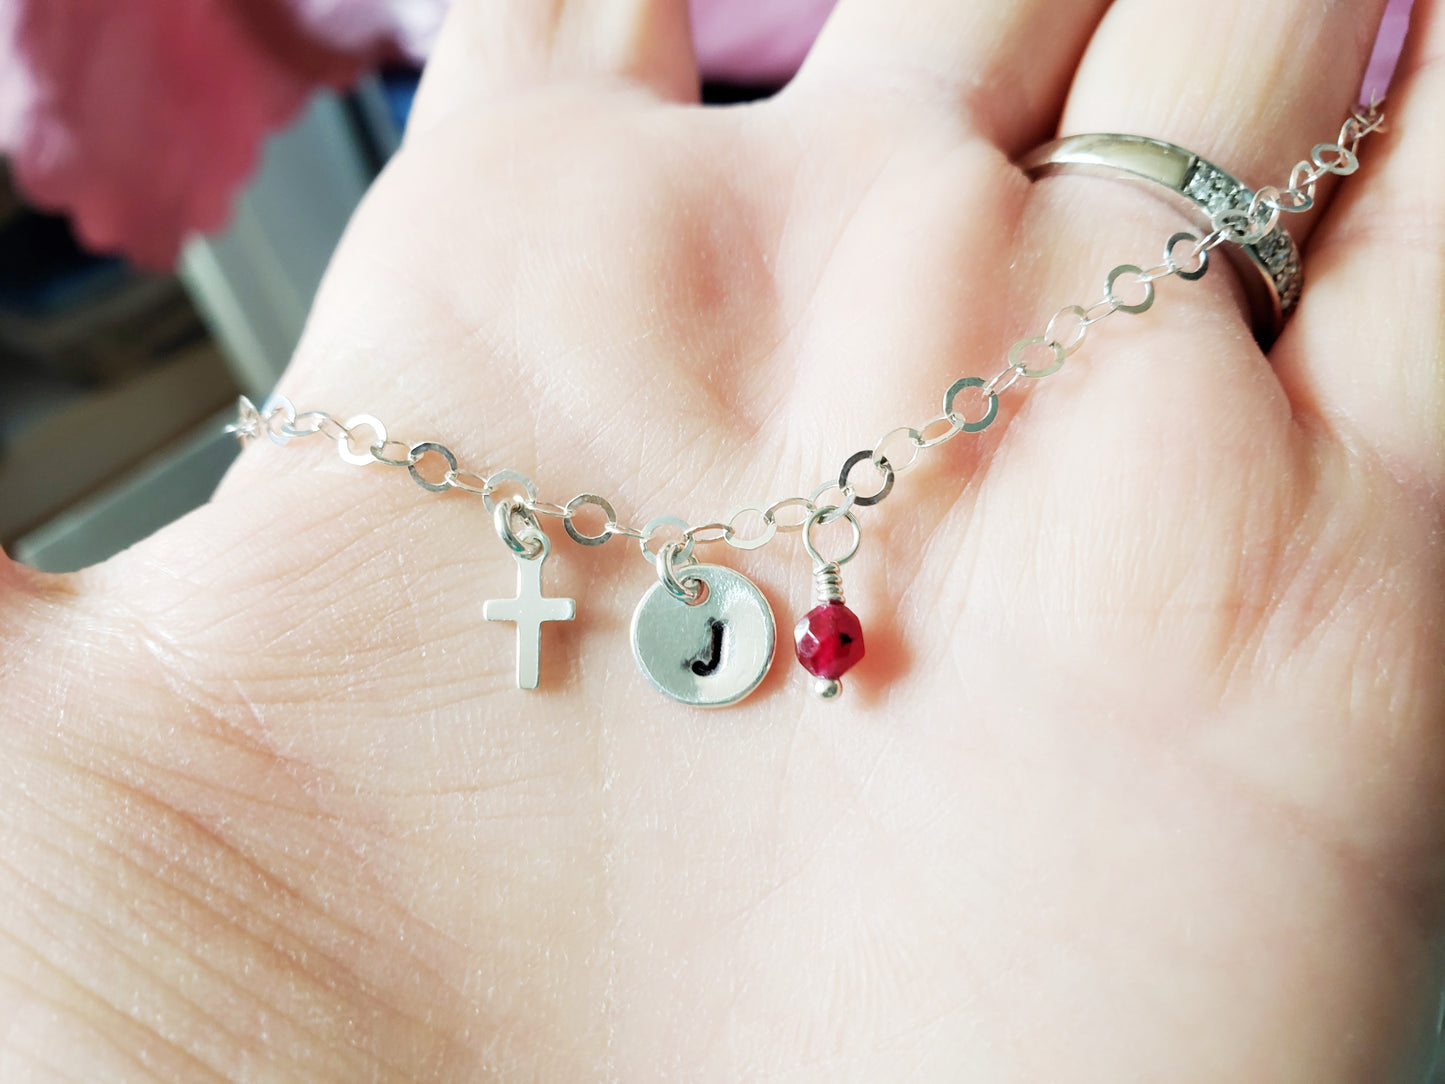 Personalized Cross, Eternity, Birthstone, Initial Anklet-Ankle Bracelet with a Small Cross, Initial pendant on Hand